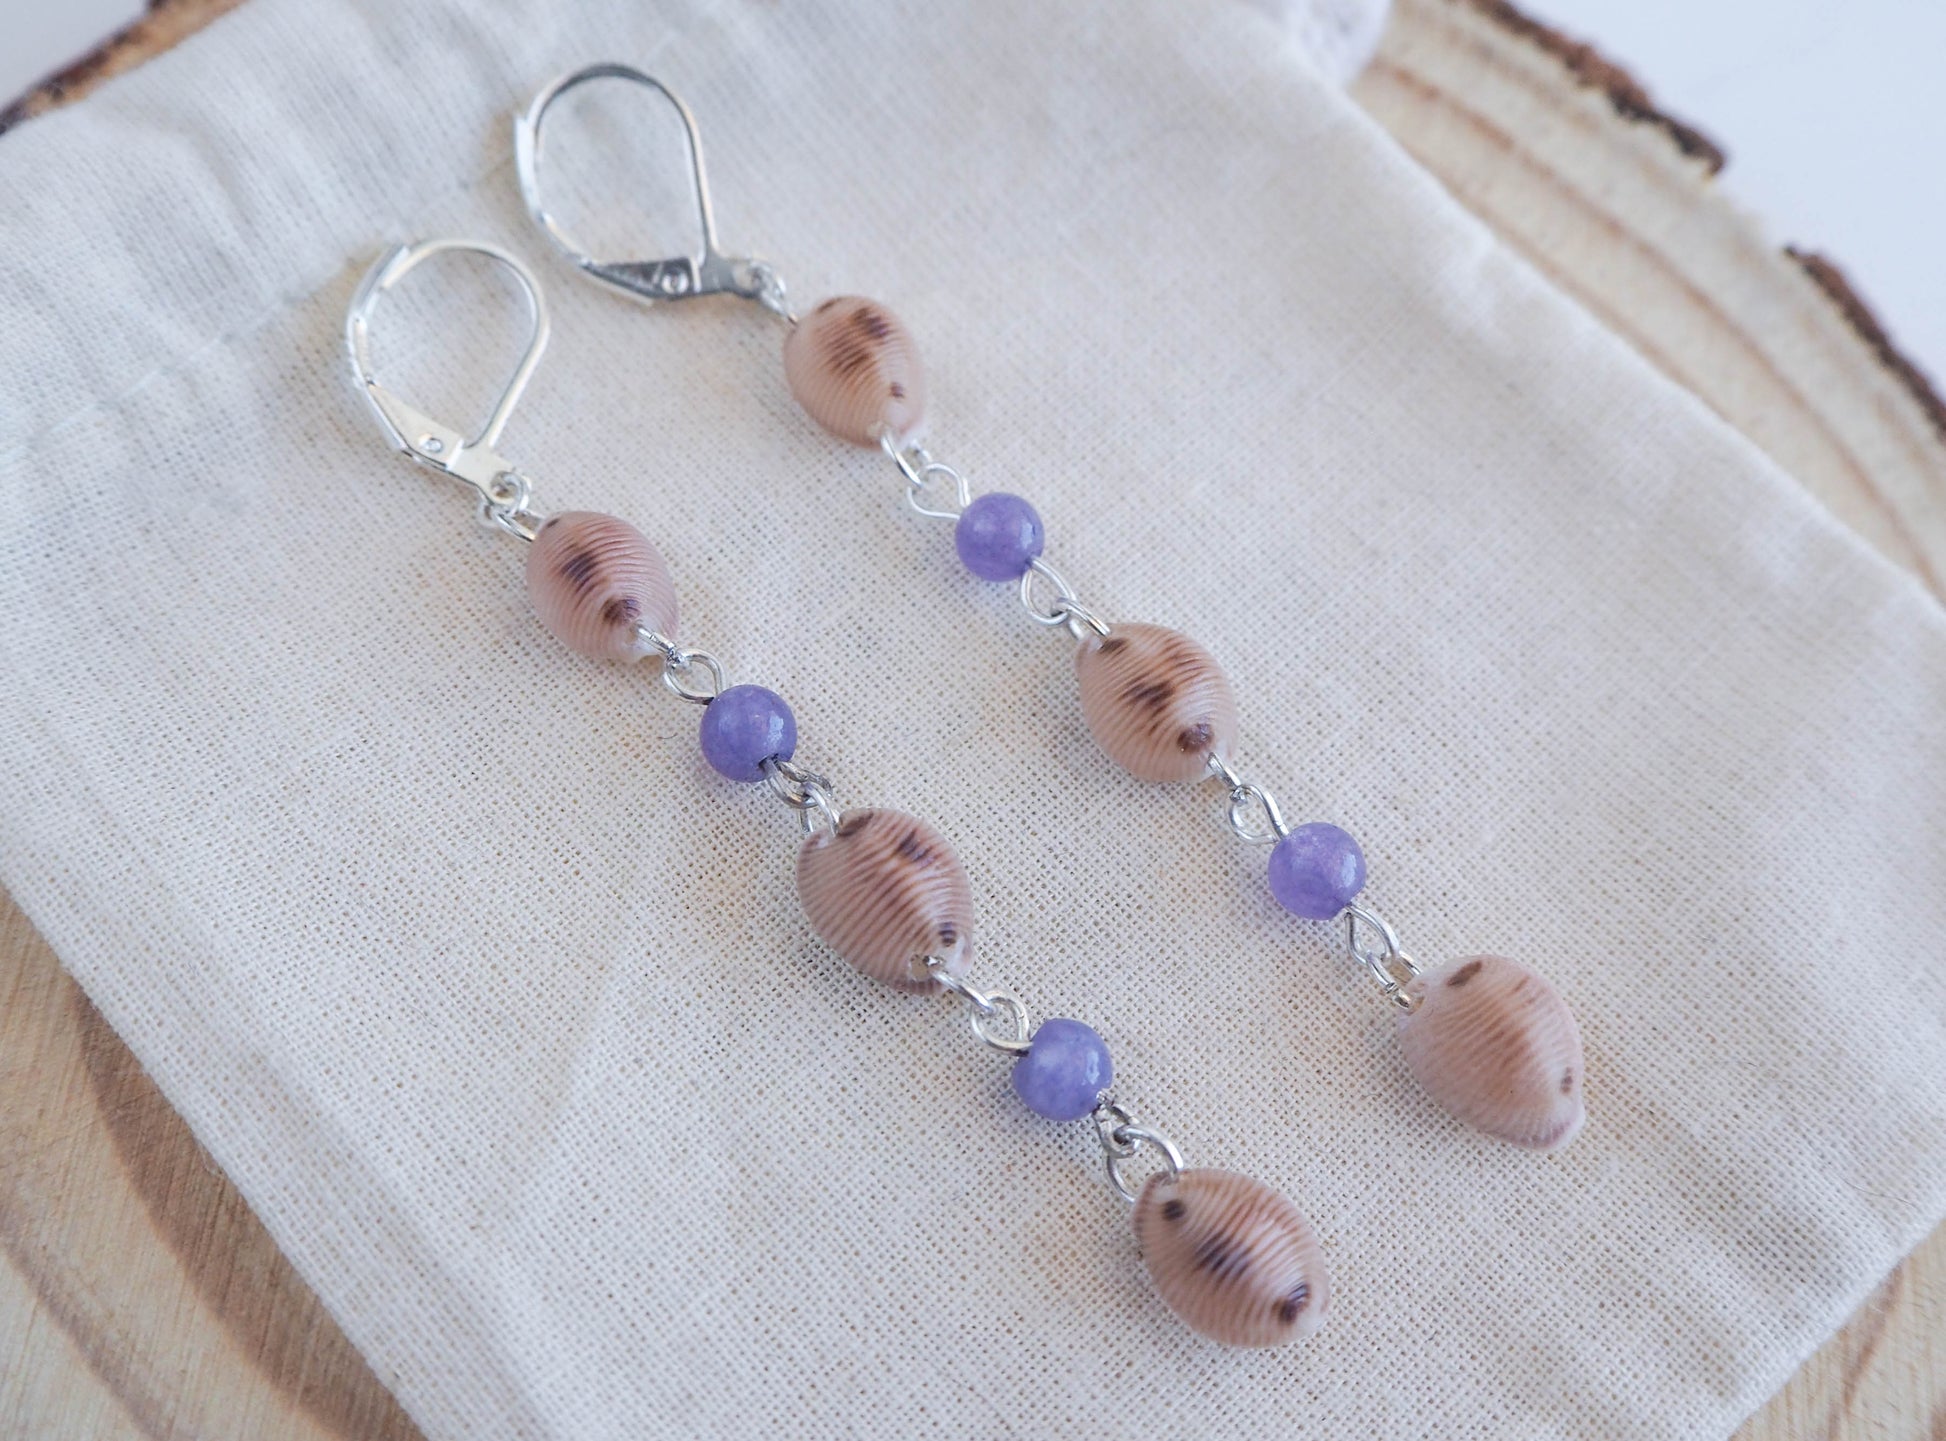 Algarve Cowrie Shell Earrings with Amethyst Beads - Coastal-inspired Jewelry